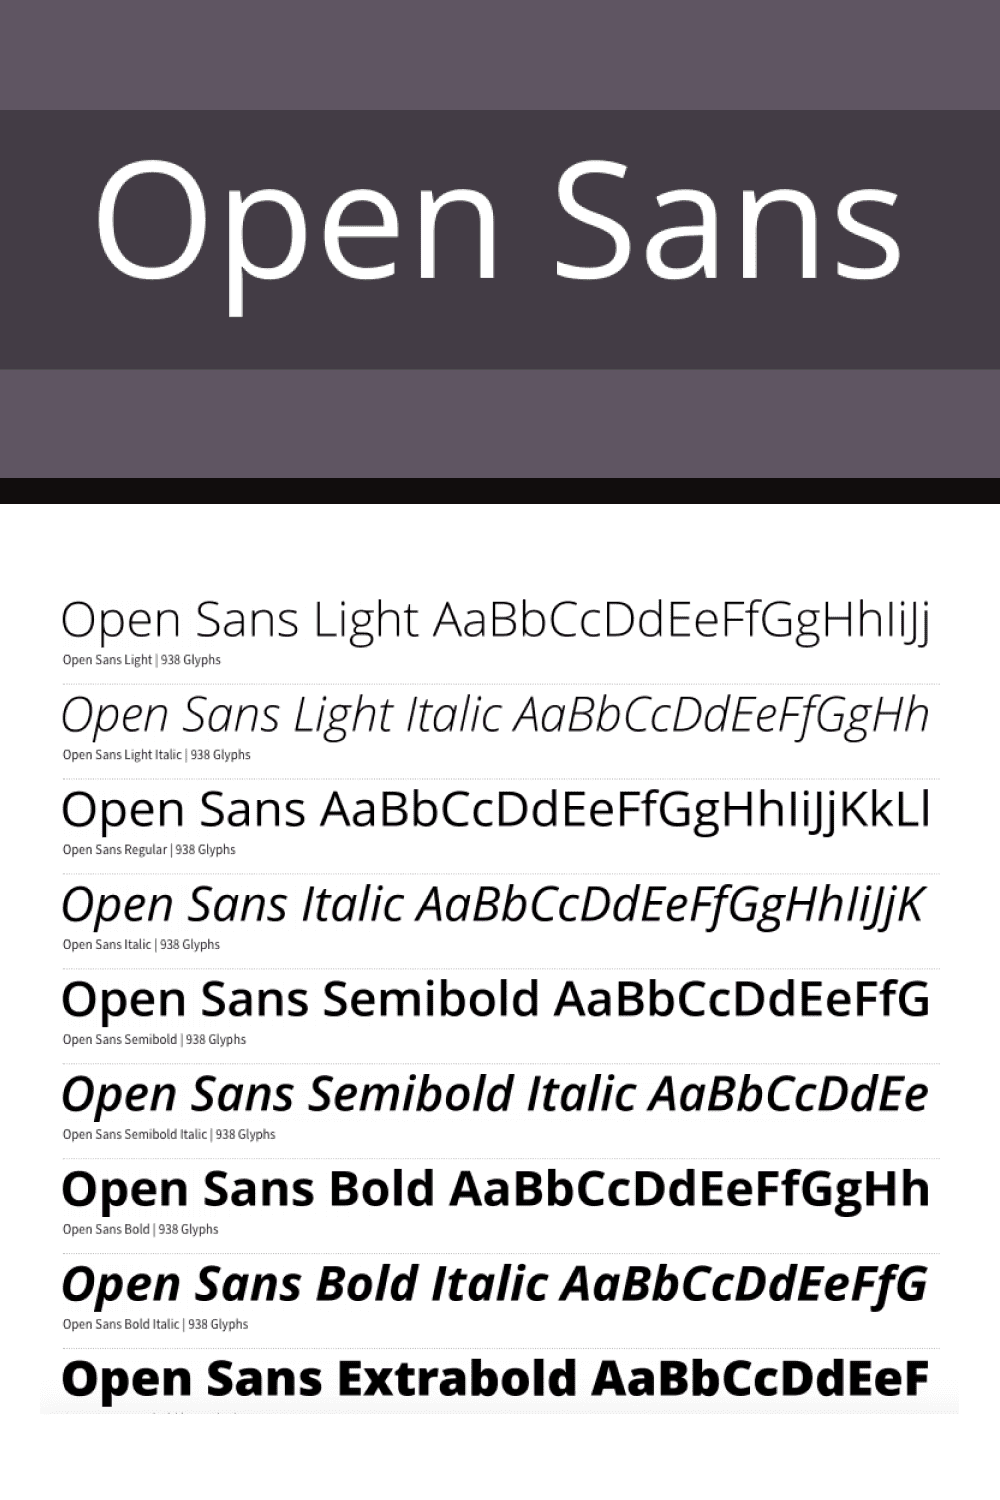 Many Variable font with different uses.